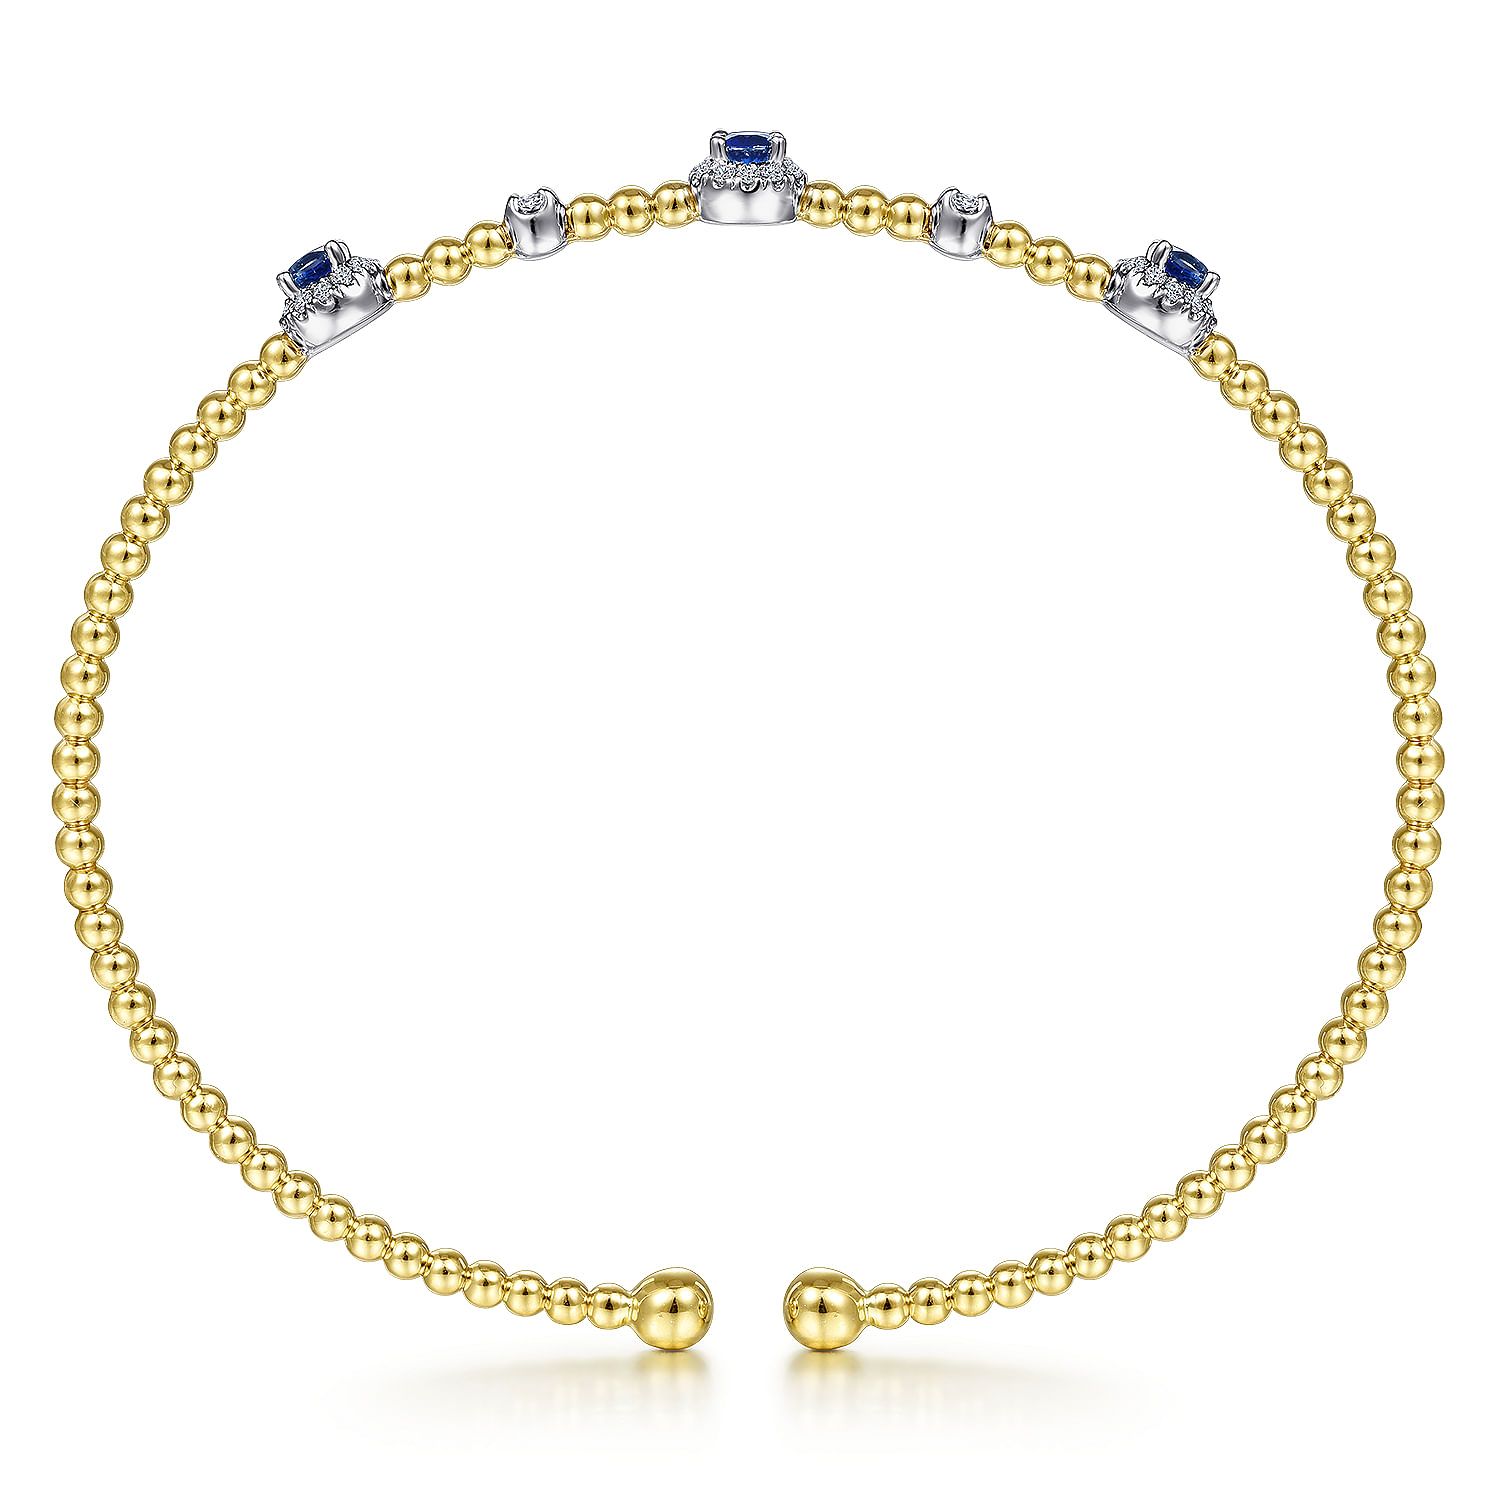 14K White-Yellow Gold Bujukan Bead Cuff Bracelet with Sapphire and Diamond Halo Stations